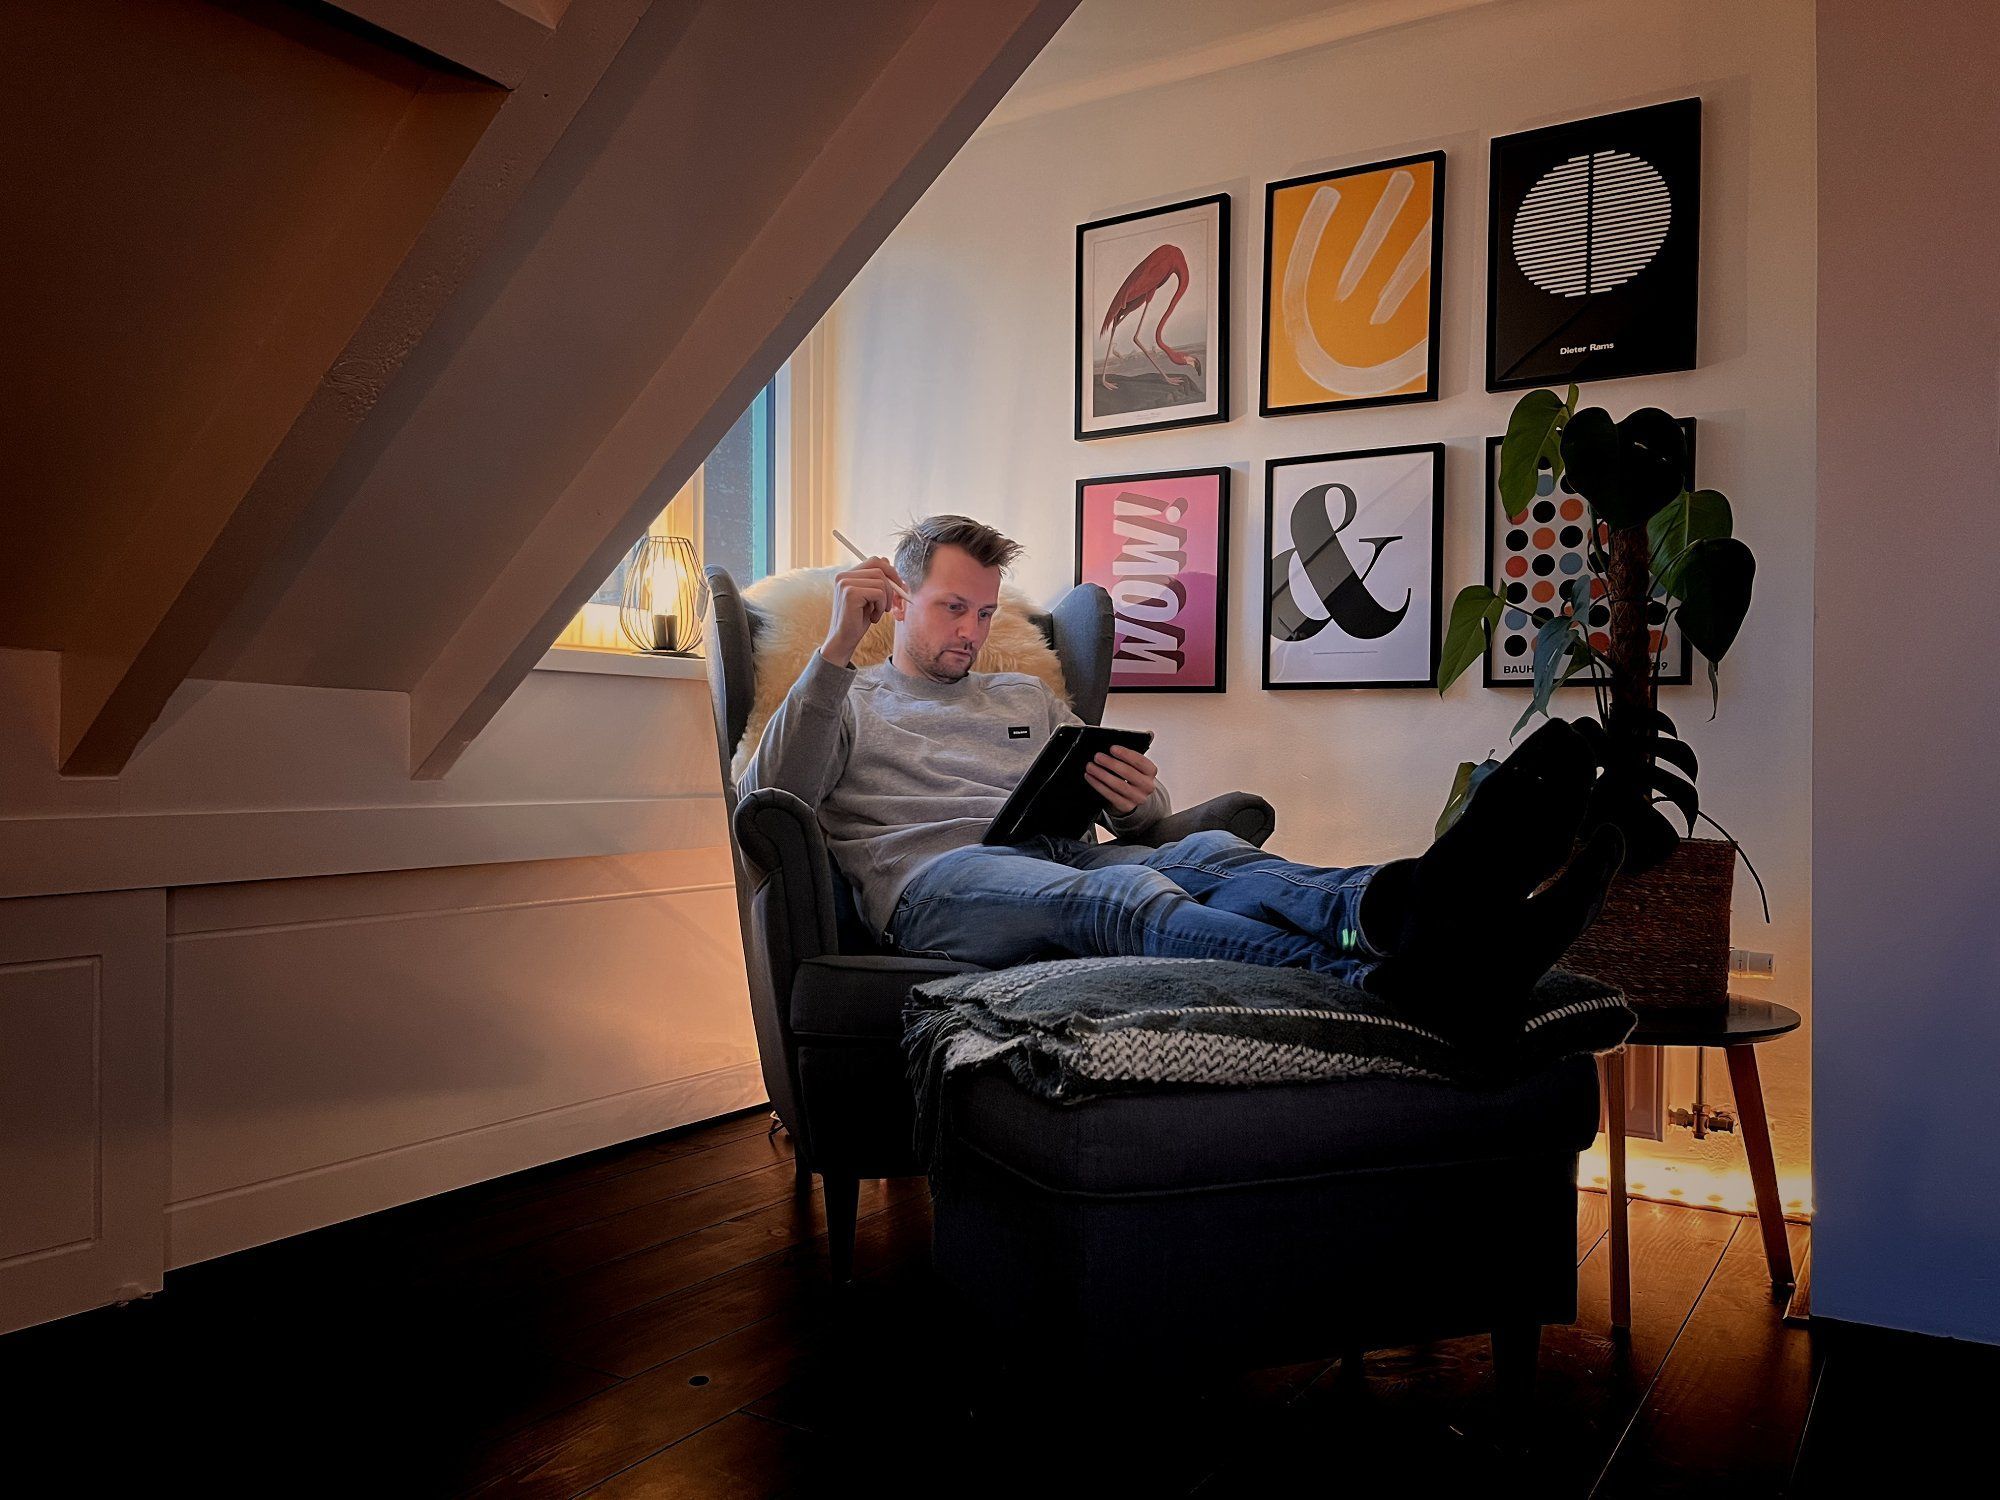 Wouter de Bres, a designer from the Netherlands, schedules his day as he sits on his IKEA STRANDMON armchair in his attic workspace